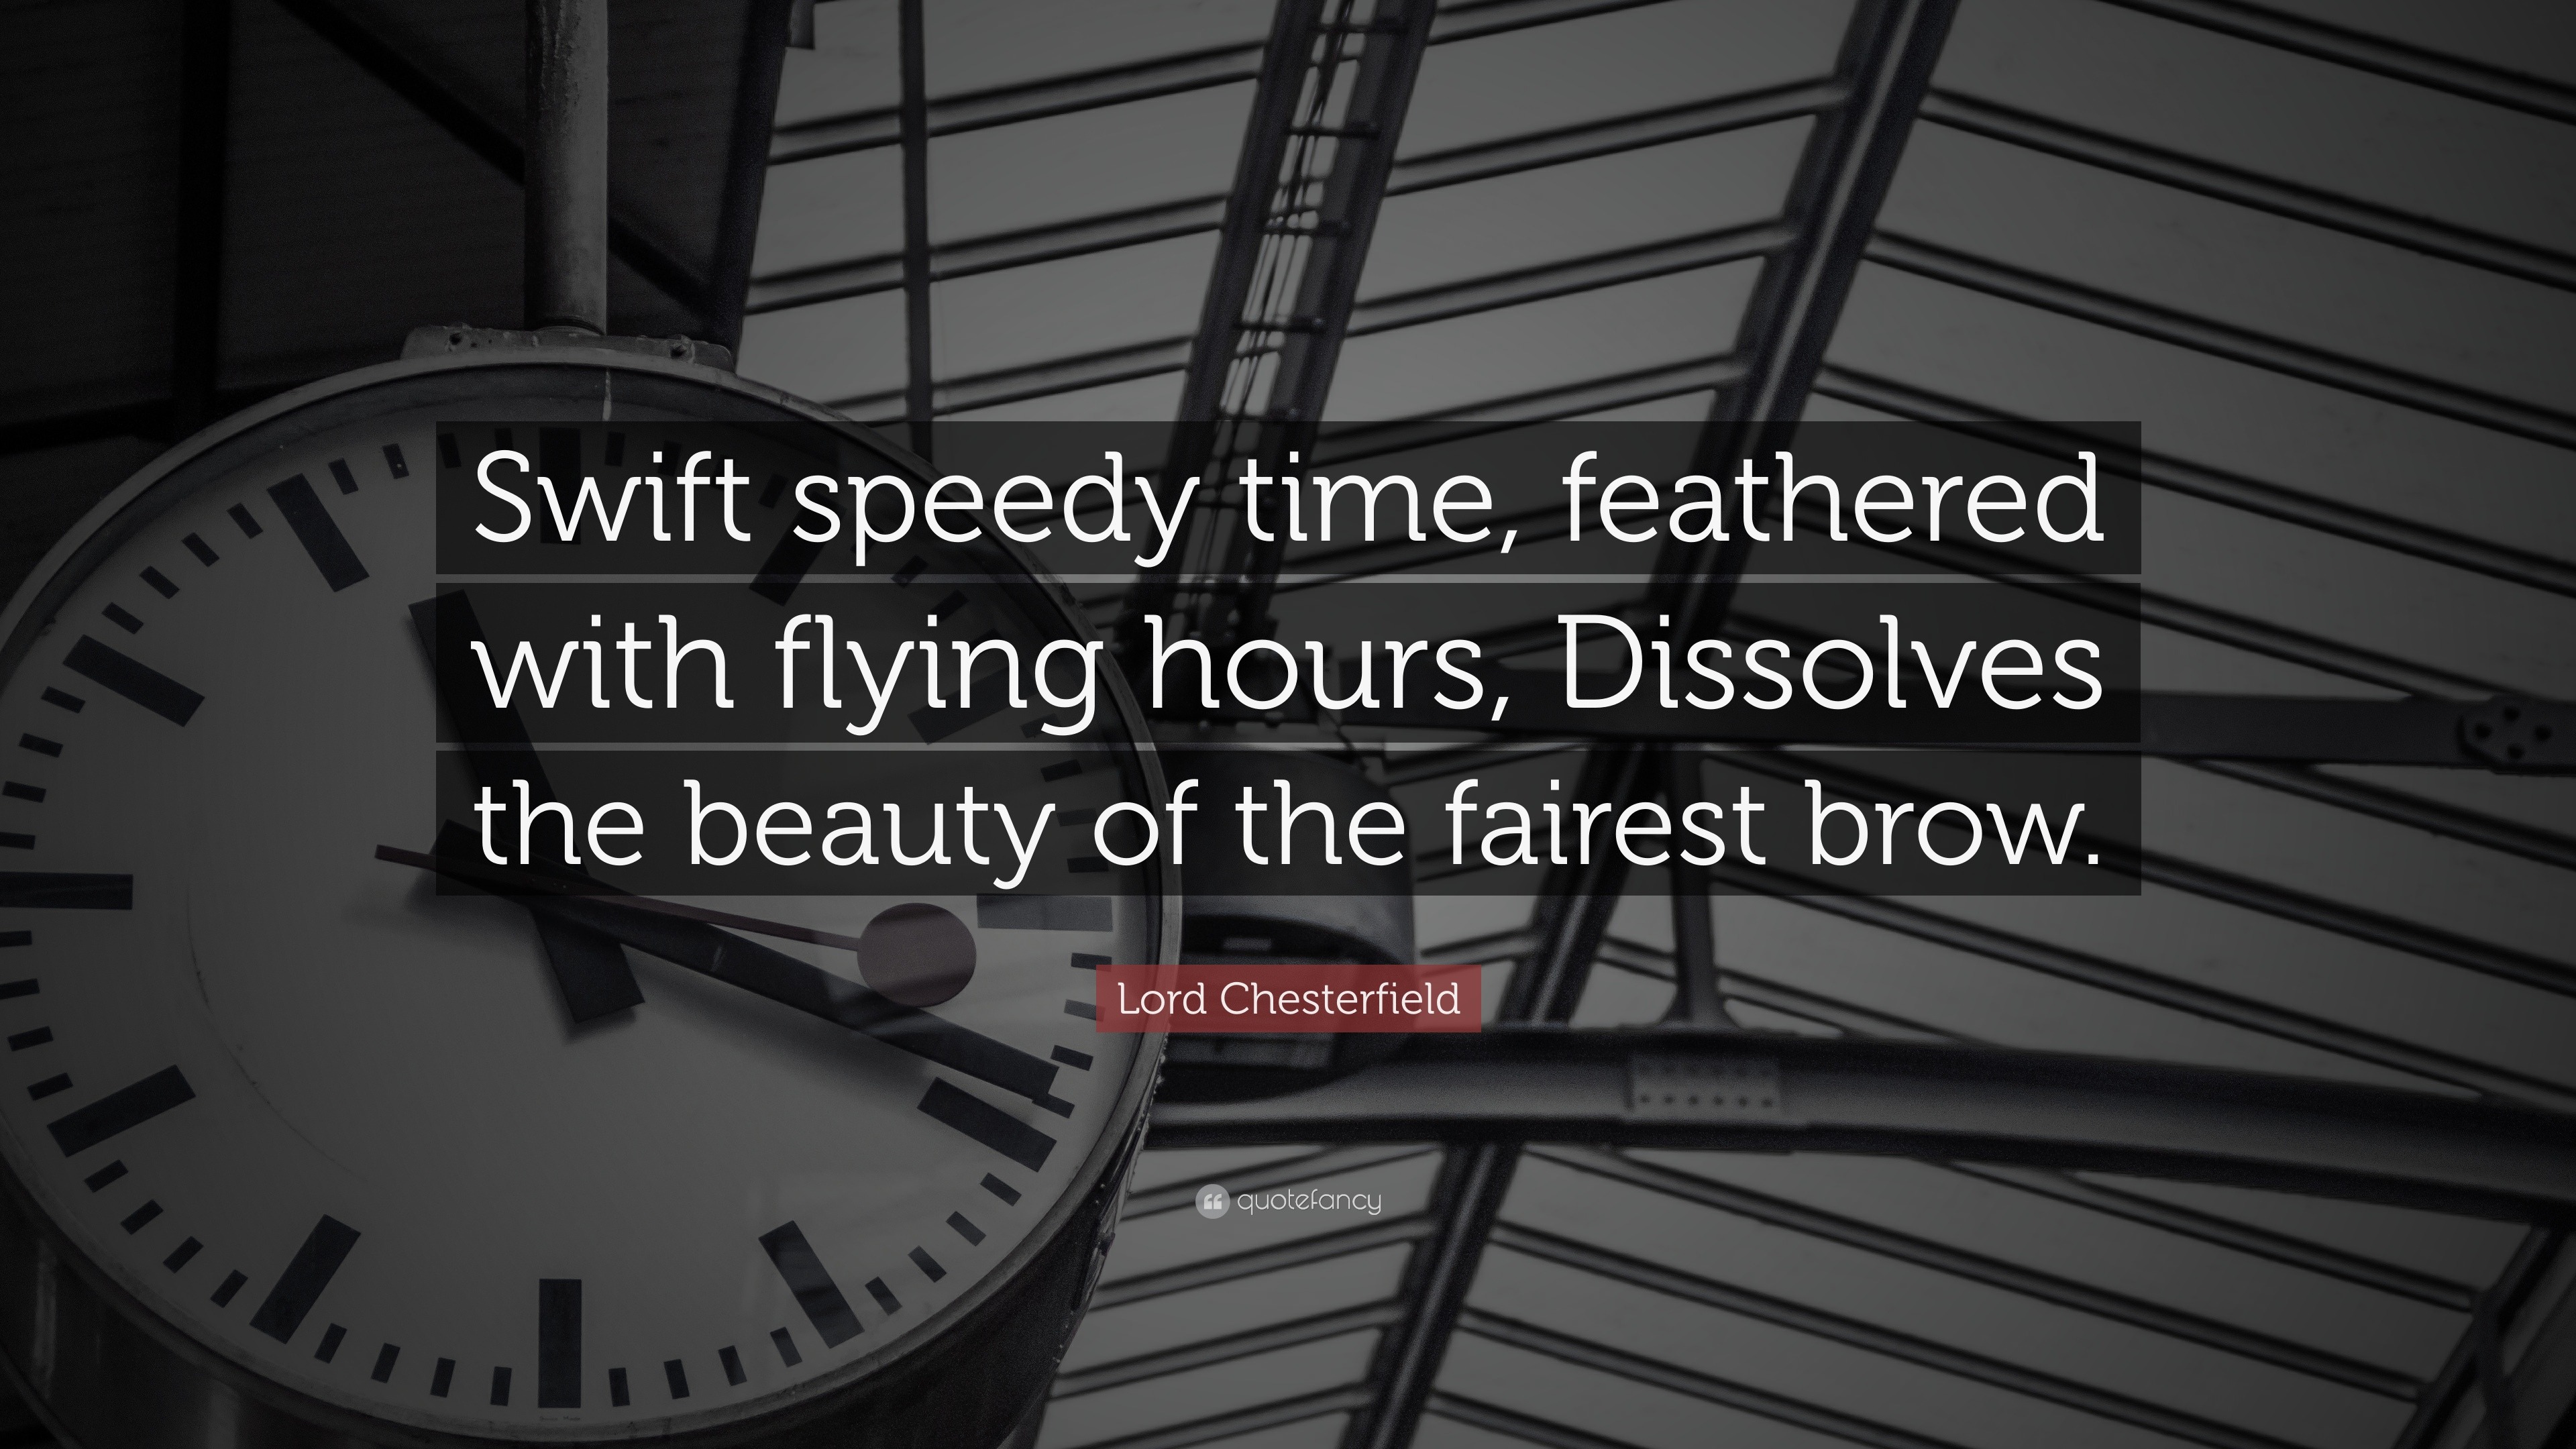 Lord Chesterfield Quote: “Swift speedy time, feathered with flying hours,  Dissolves the beauty of the fairest